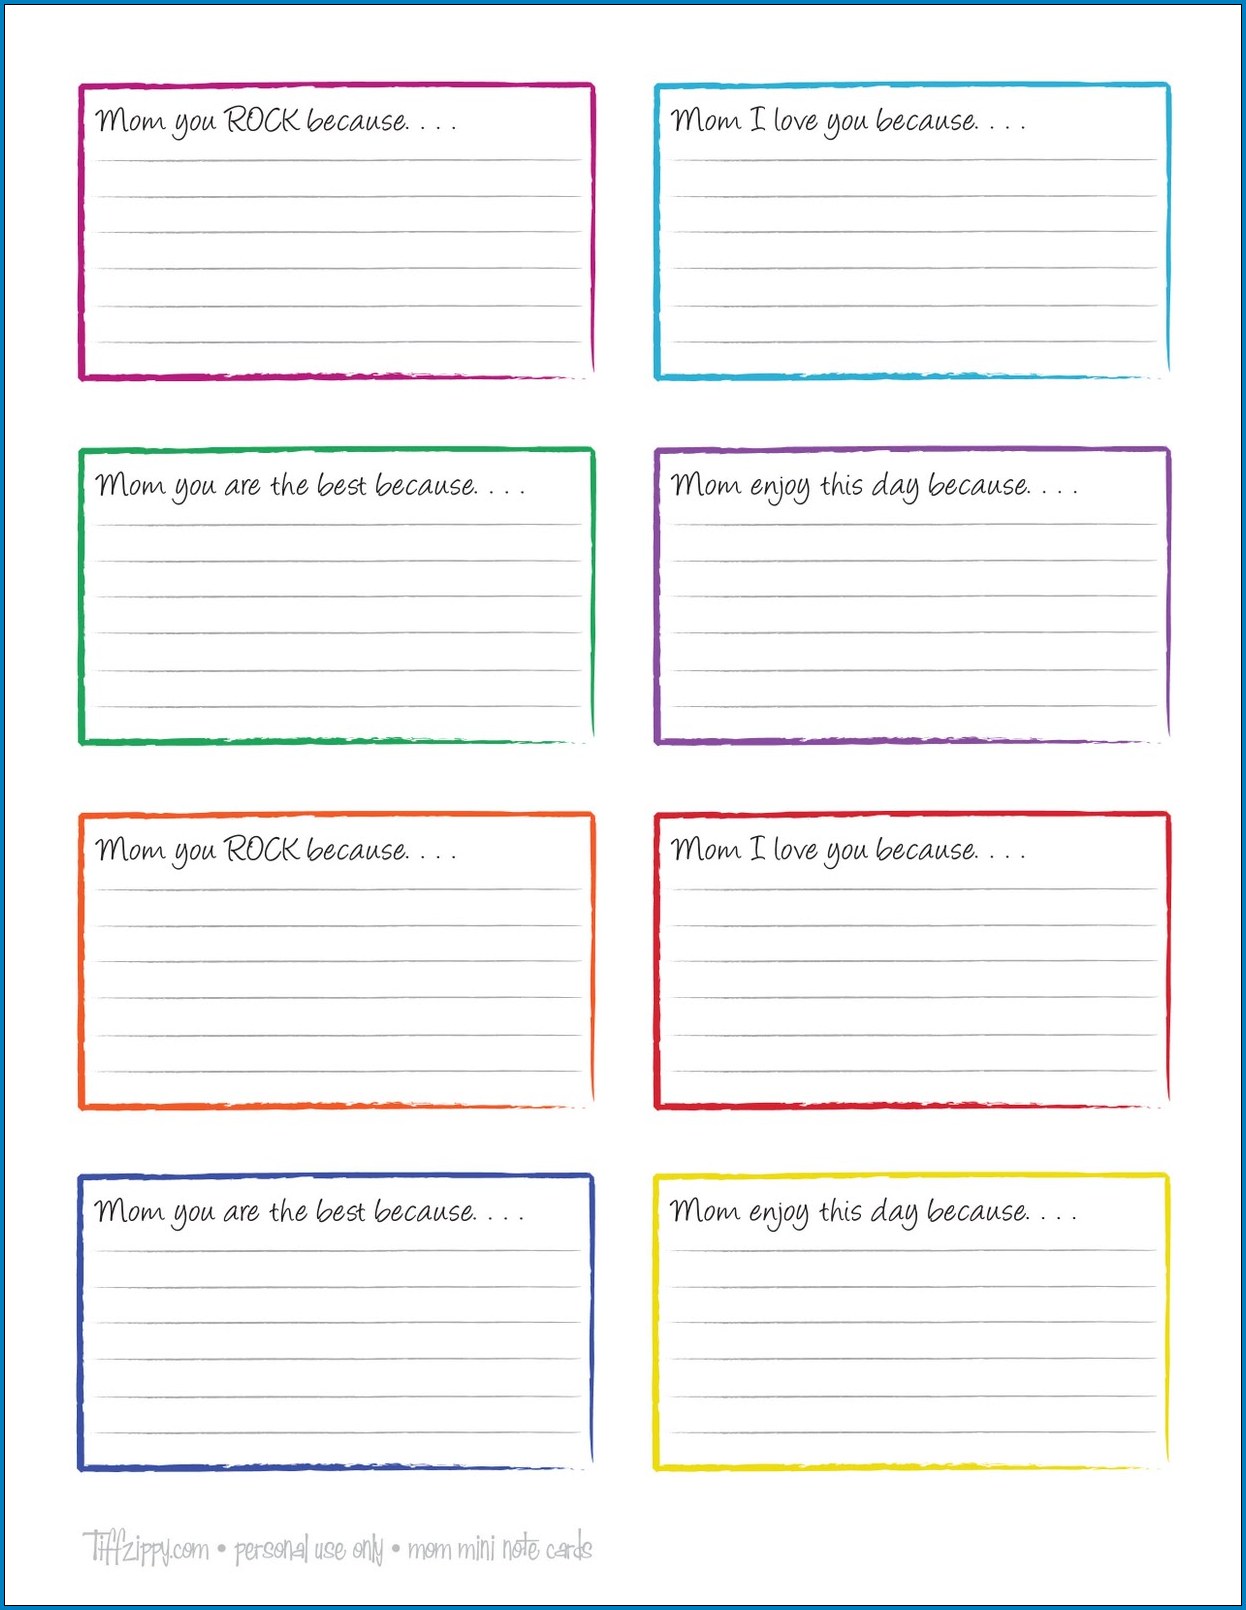 Example of Note Card Template